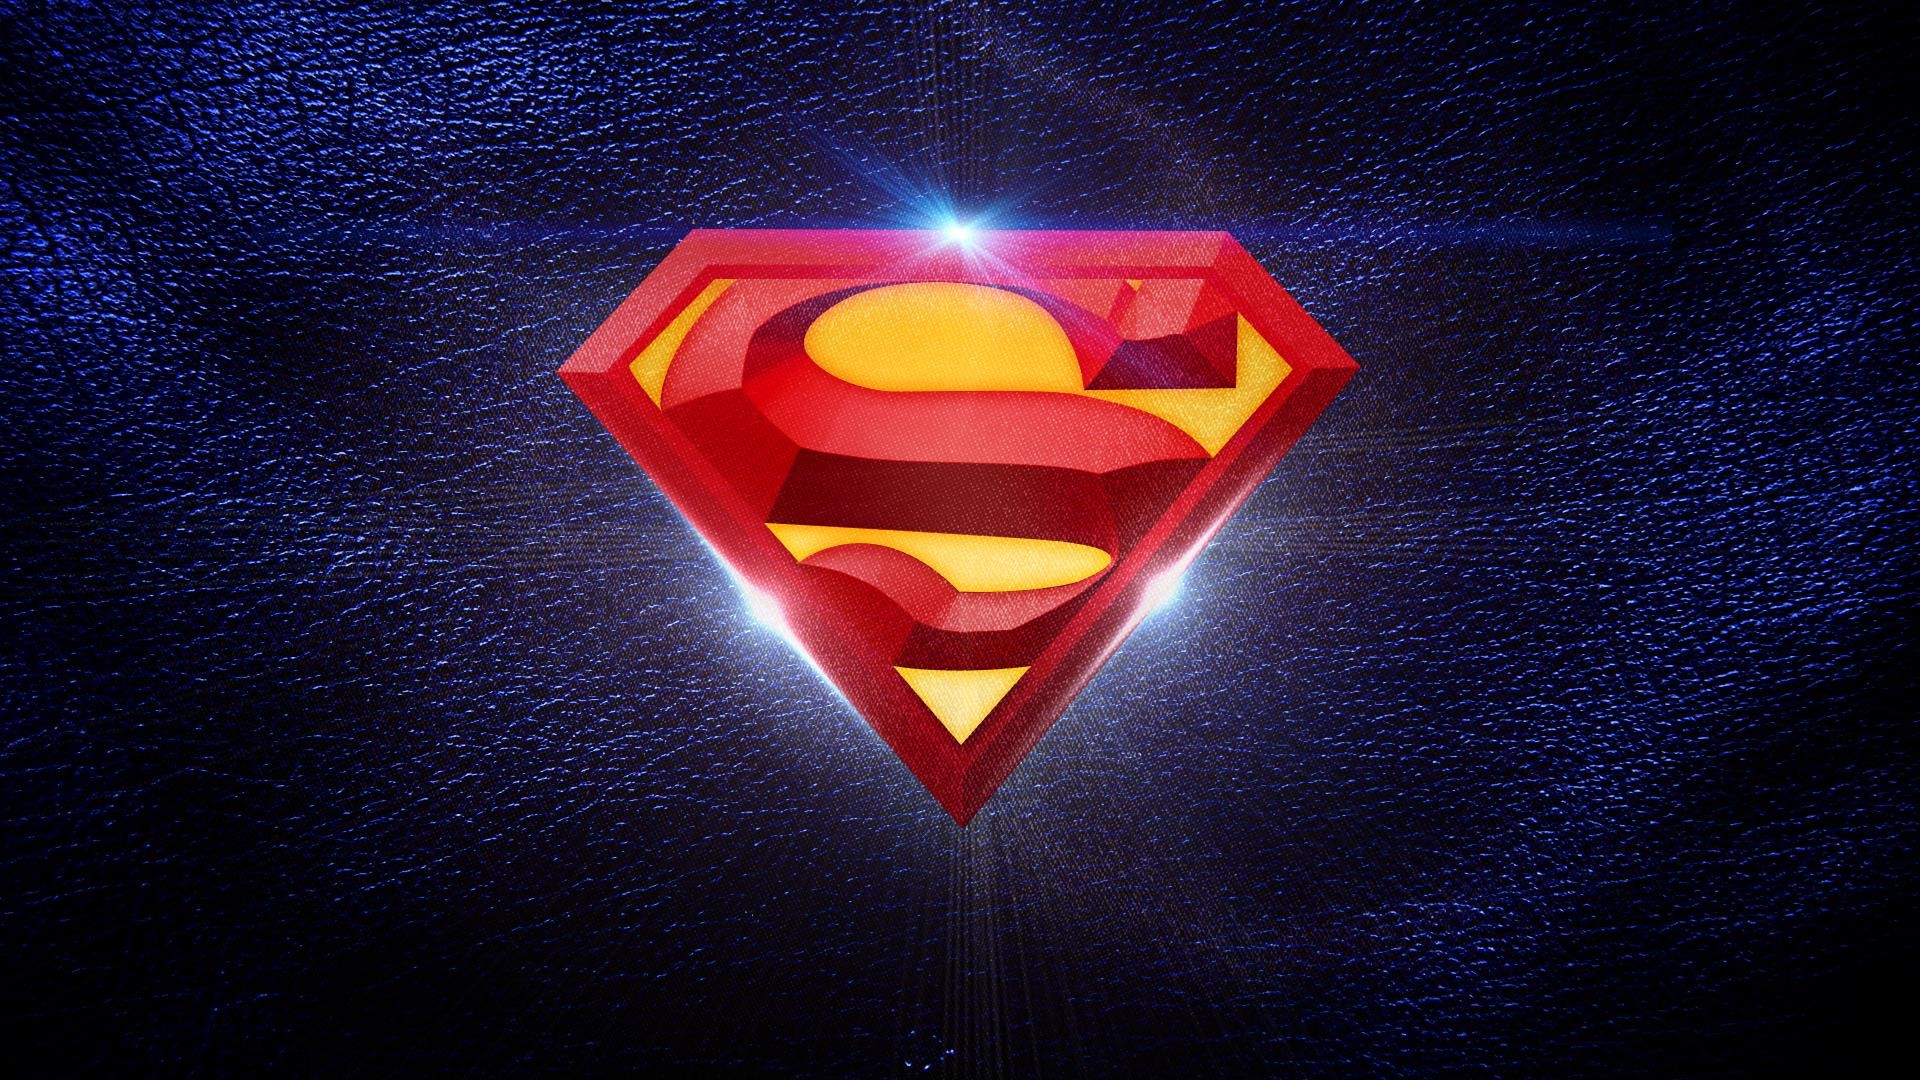 1920x1080 Superman logo wallpaper - (#153234) - High Quality and Resolution .